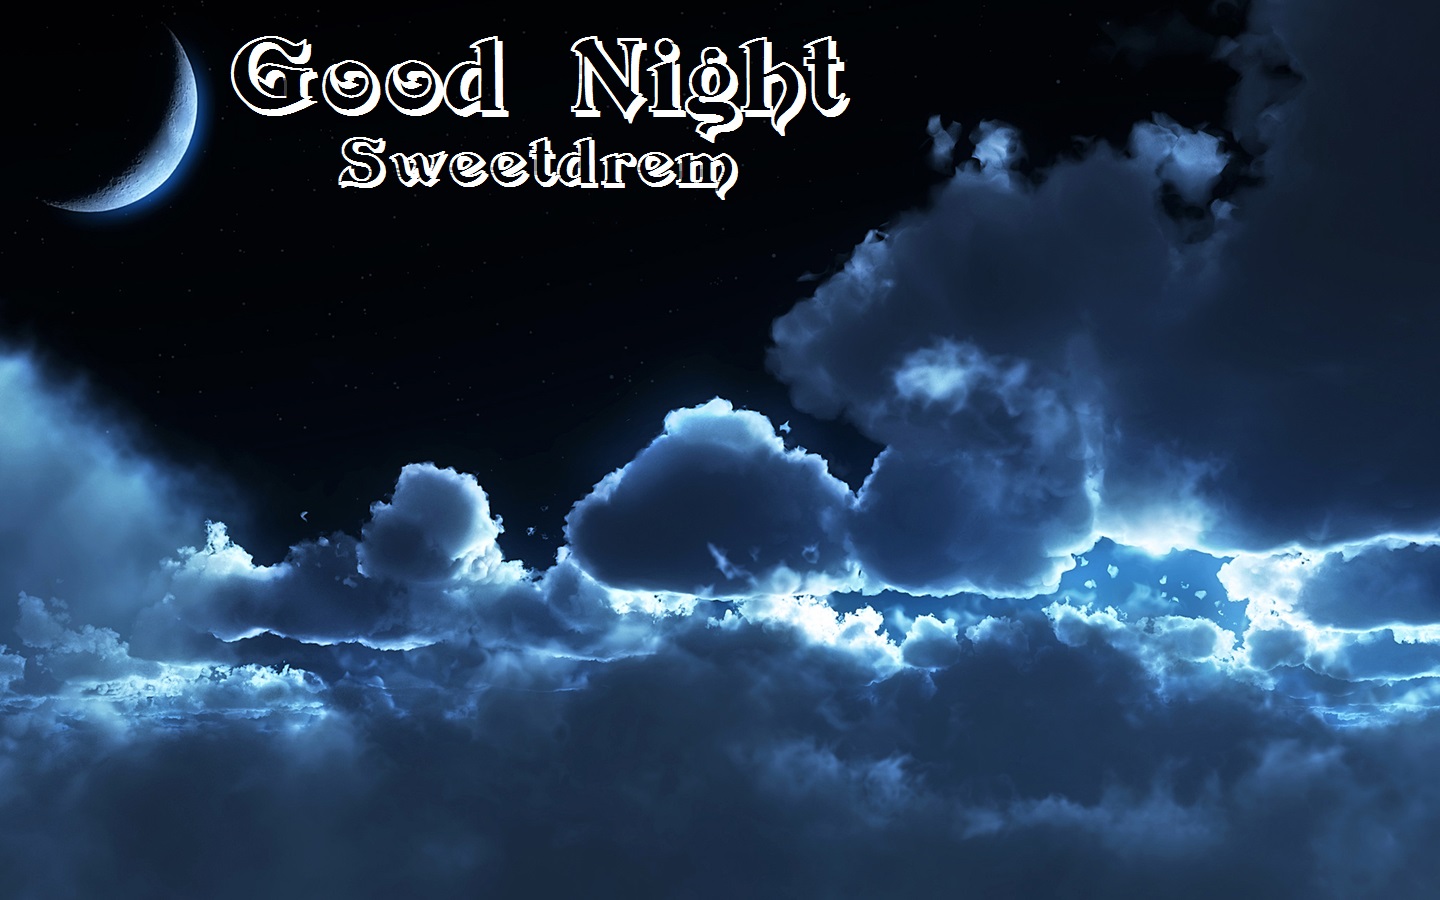 Good Night Wishes Messages Cards, SMS Images - Festival Chaska